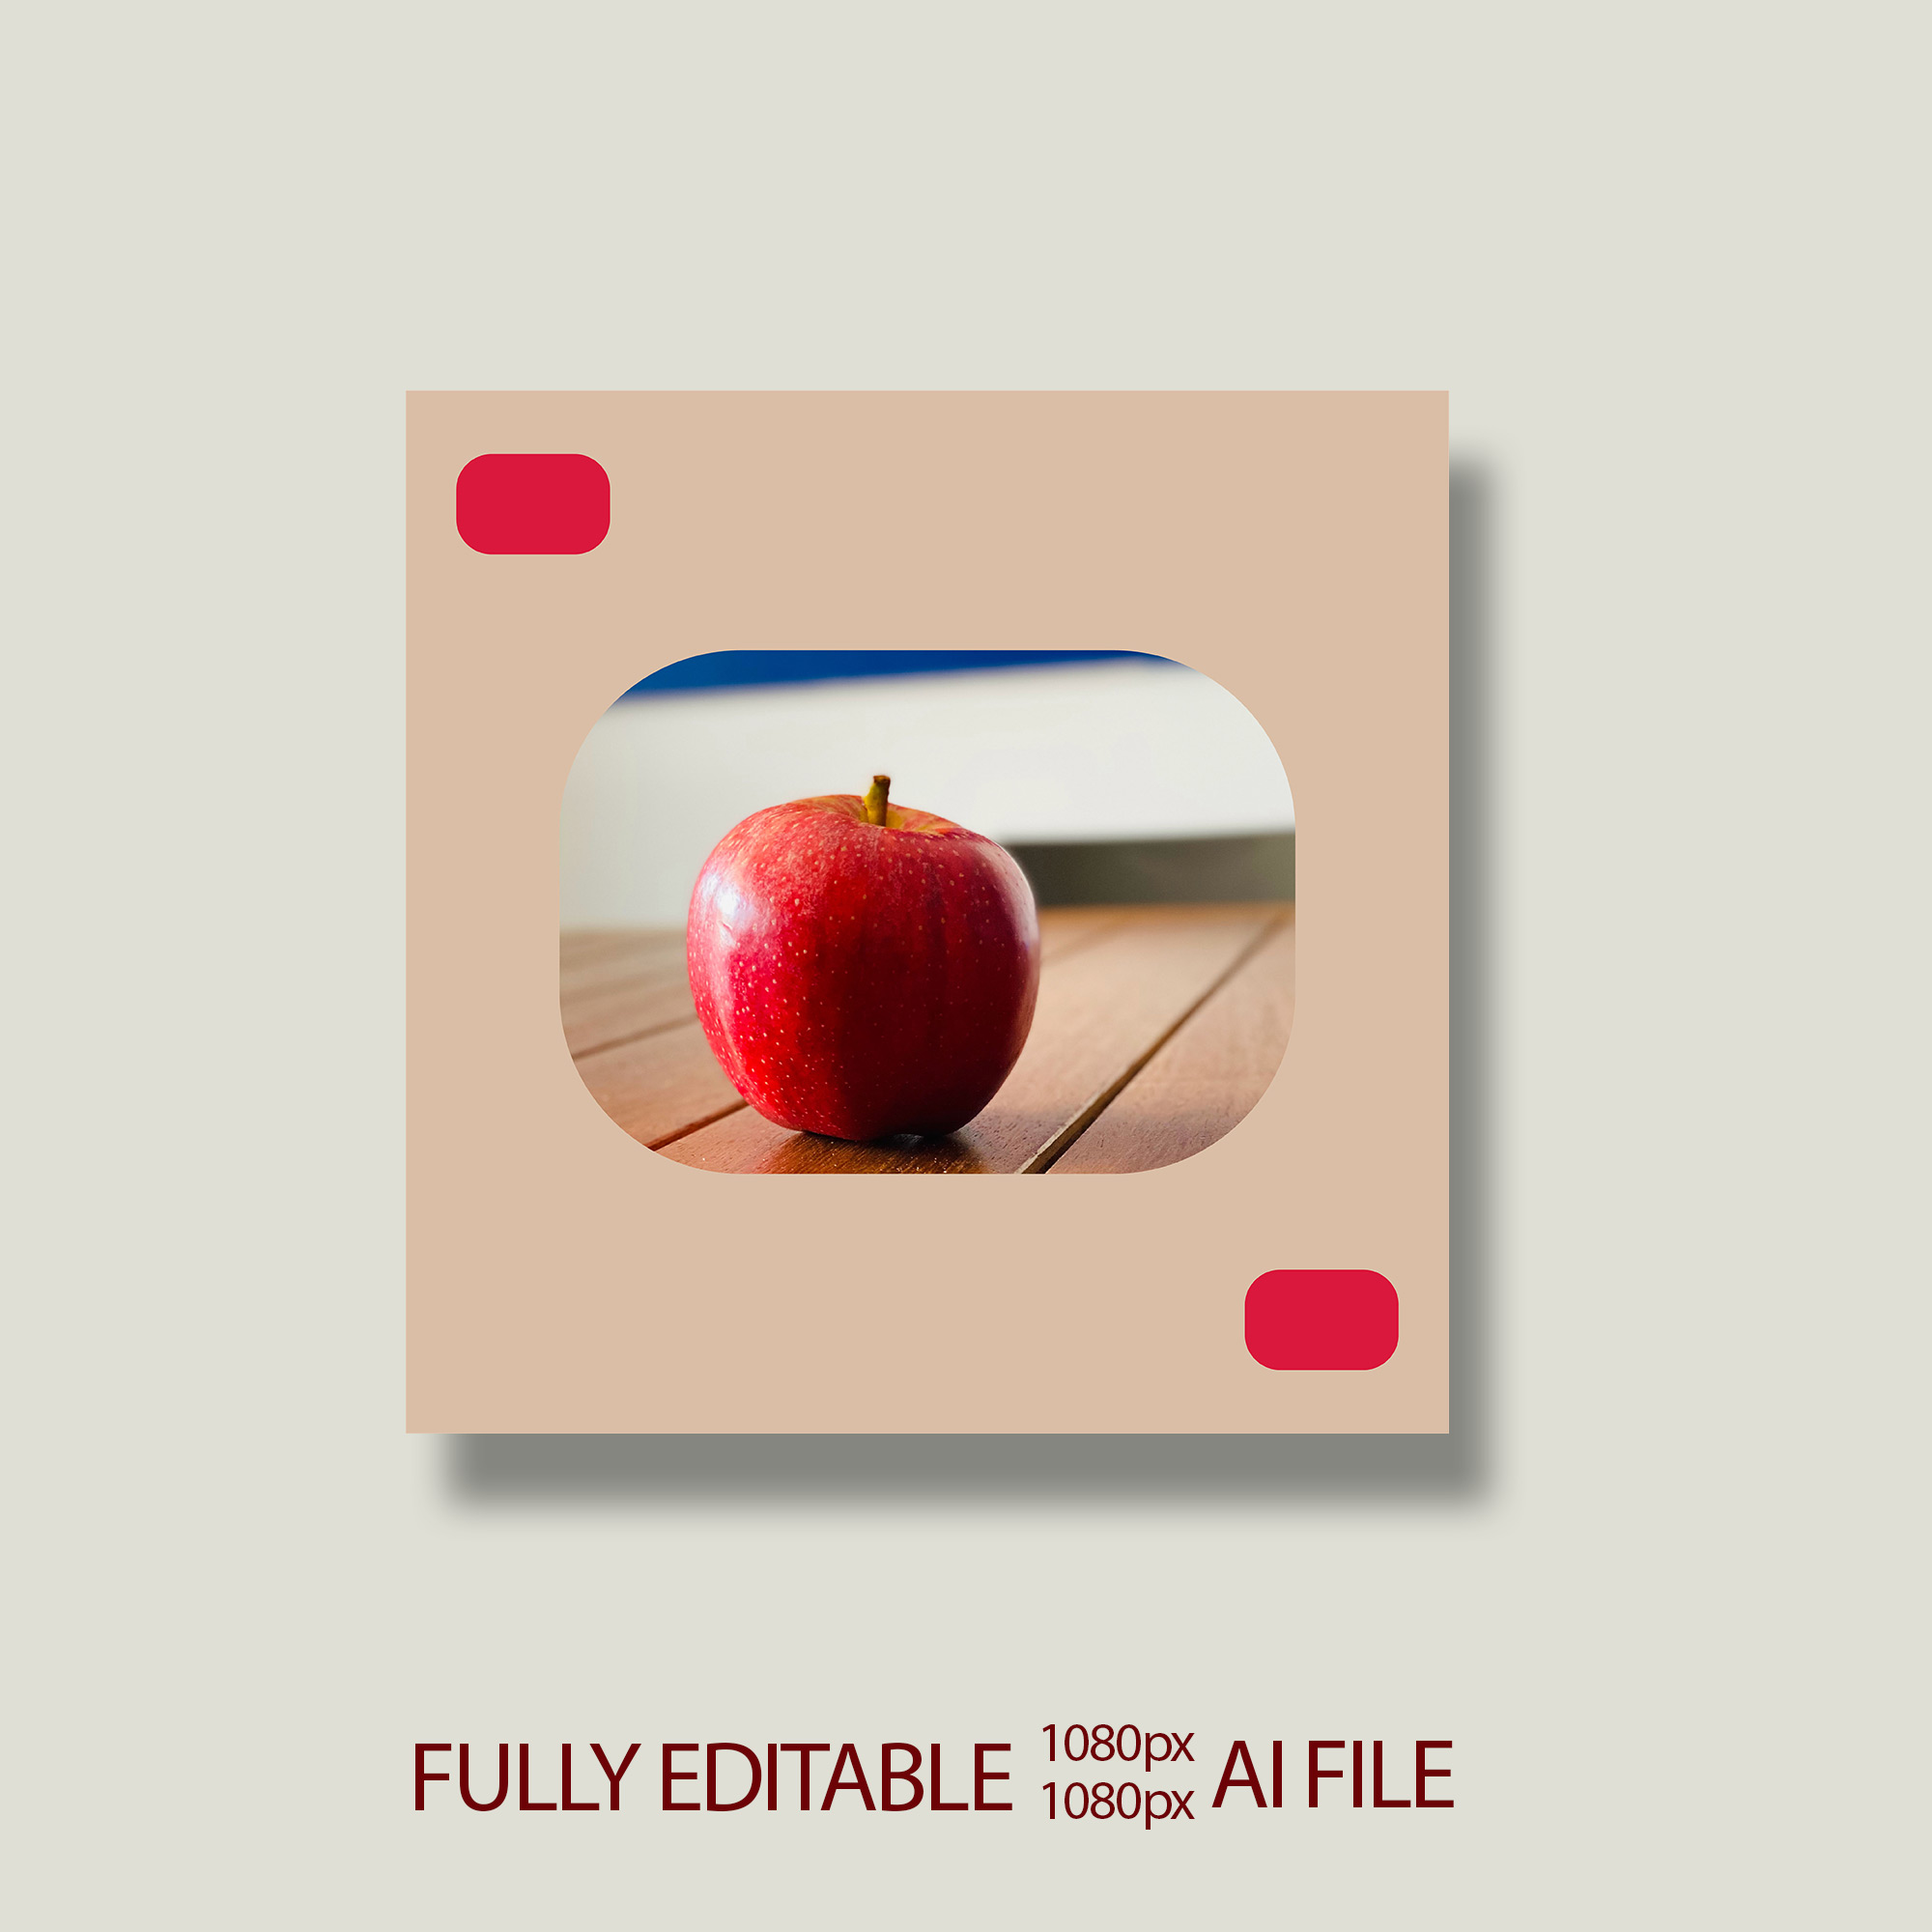 Red apple sitting on top of a wooden table.